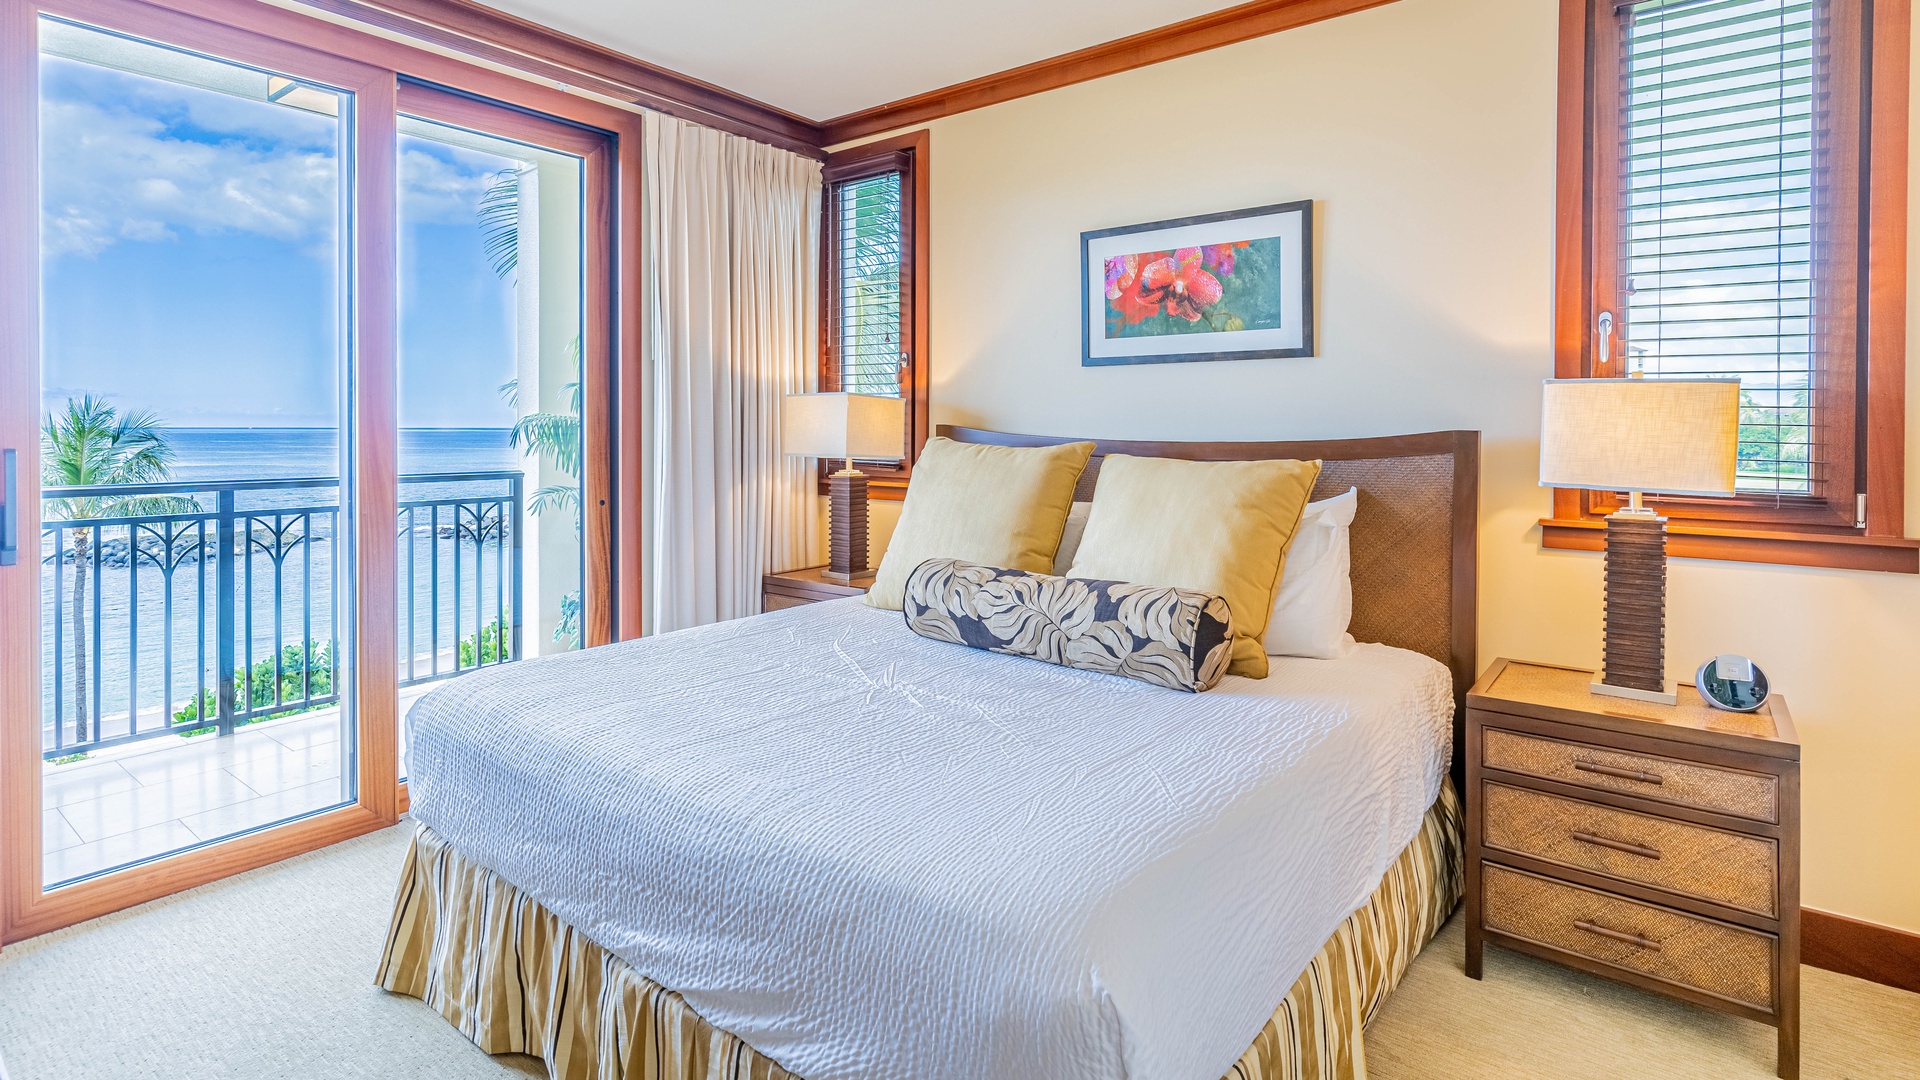 Kapolei Vacation Rentals, Ko Olina Beach Villas B410 - The primary guest bedroom with access to the lanai.